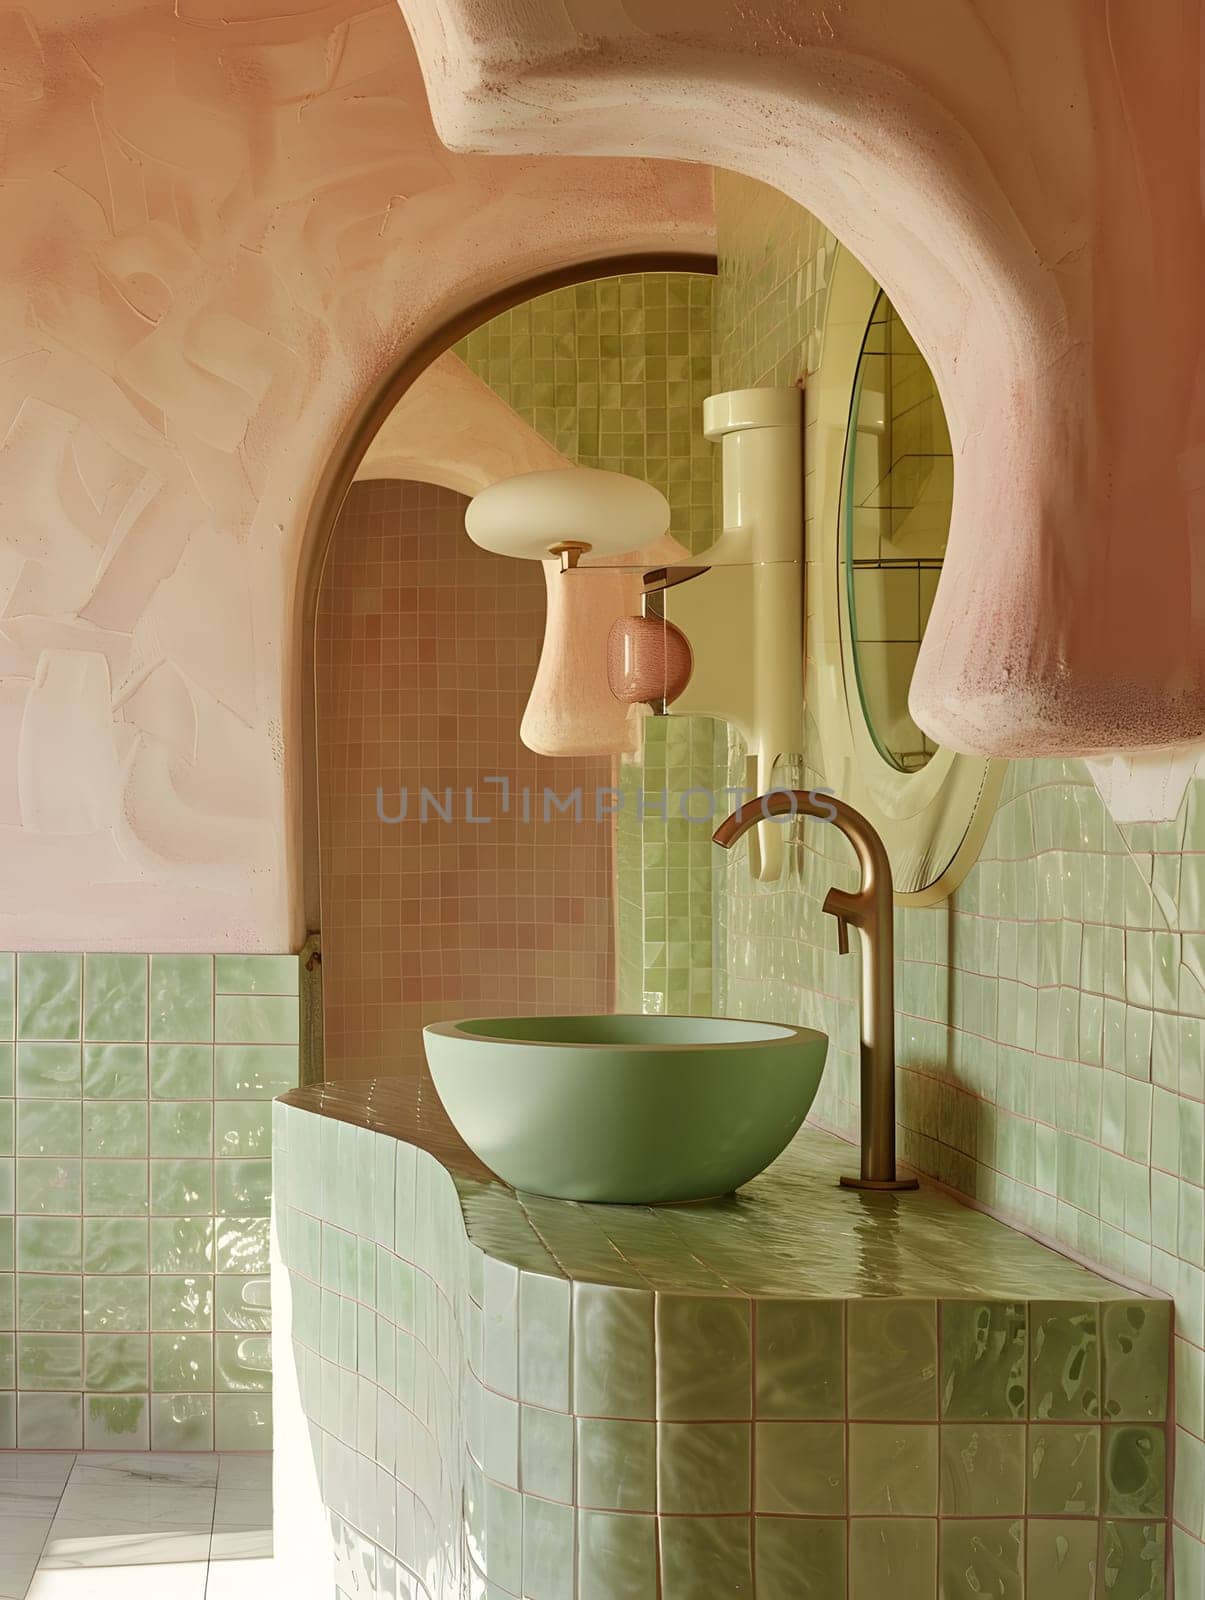 The bathroom features a sink and tiles in the shade of green, adding a refreshing touch to the space with its plumbing fixtures and composite materials